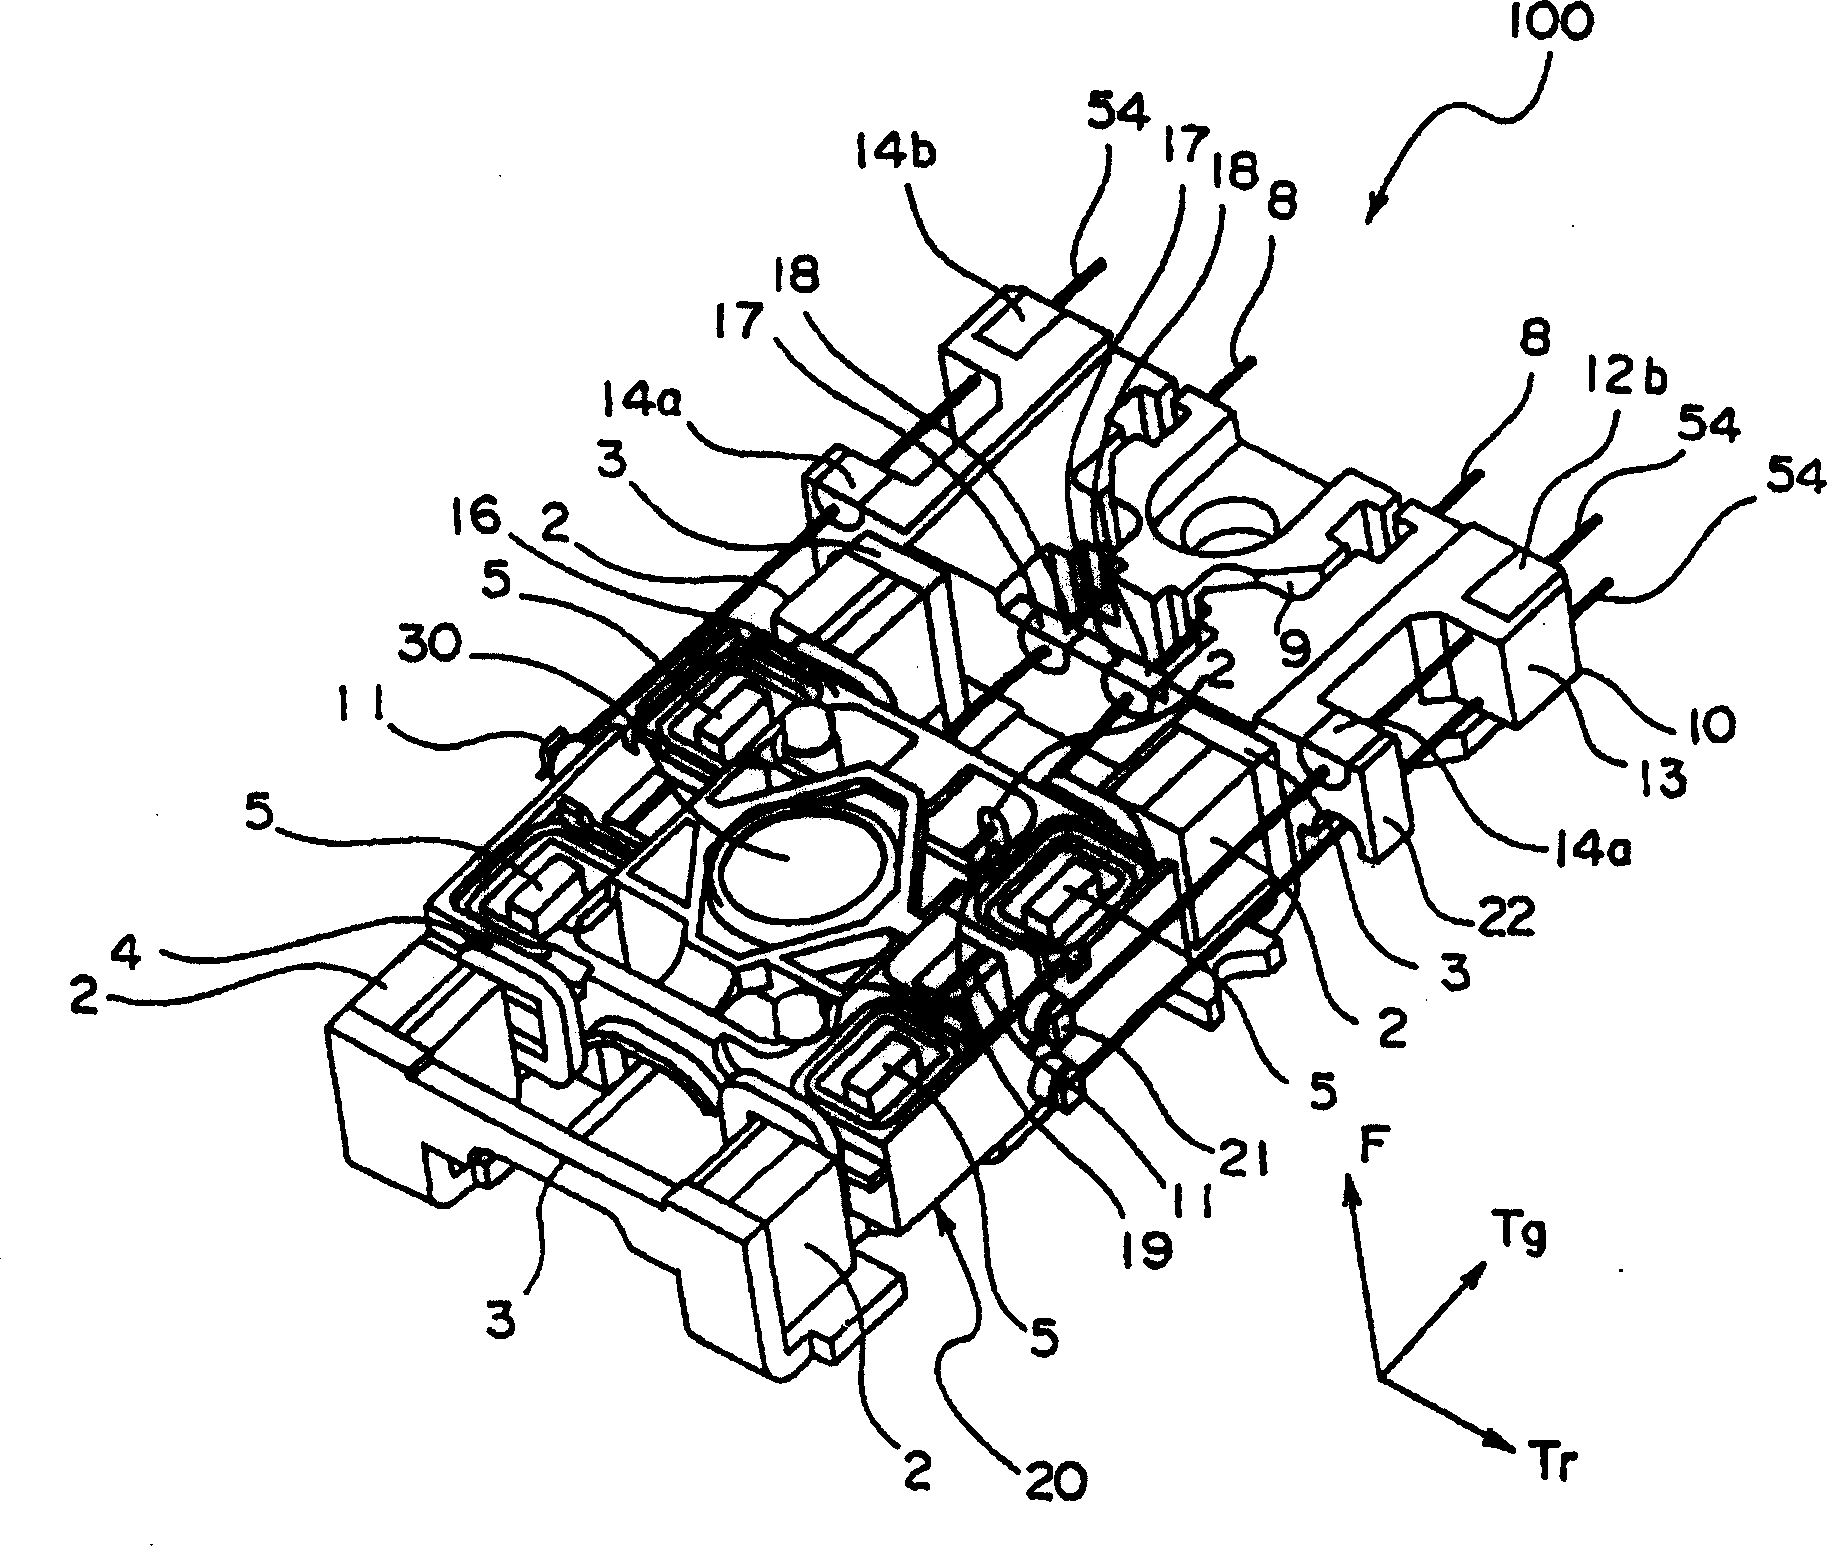 Objective lens driving device